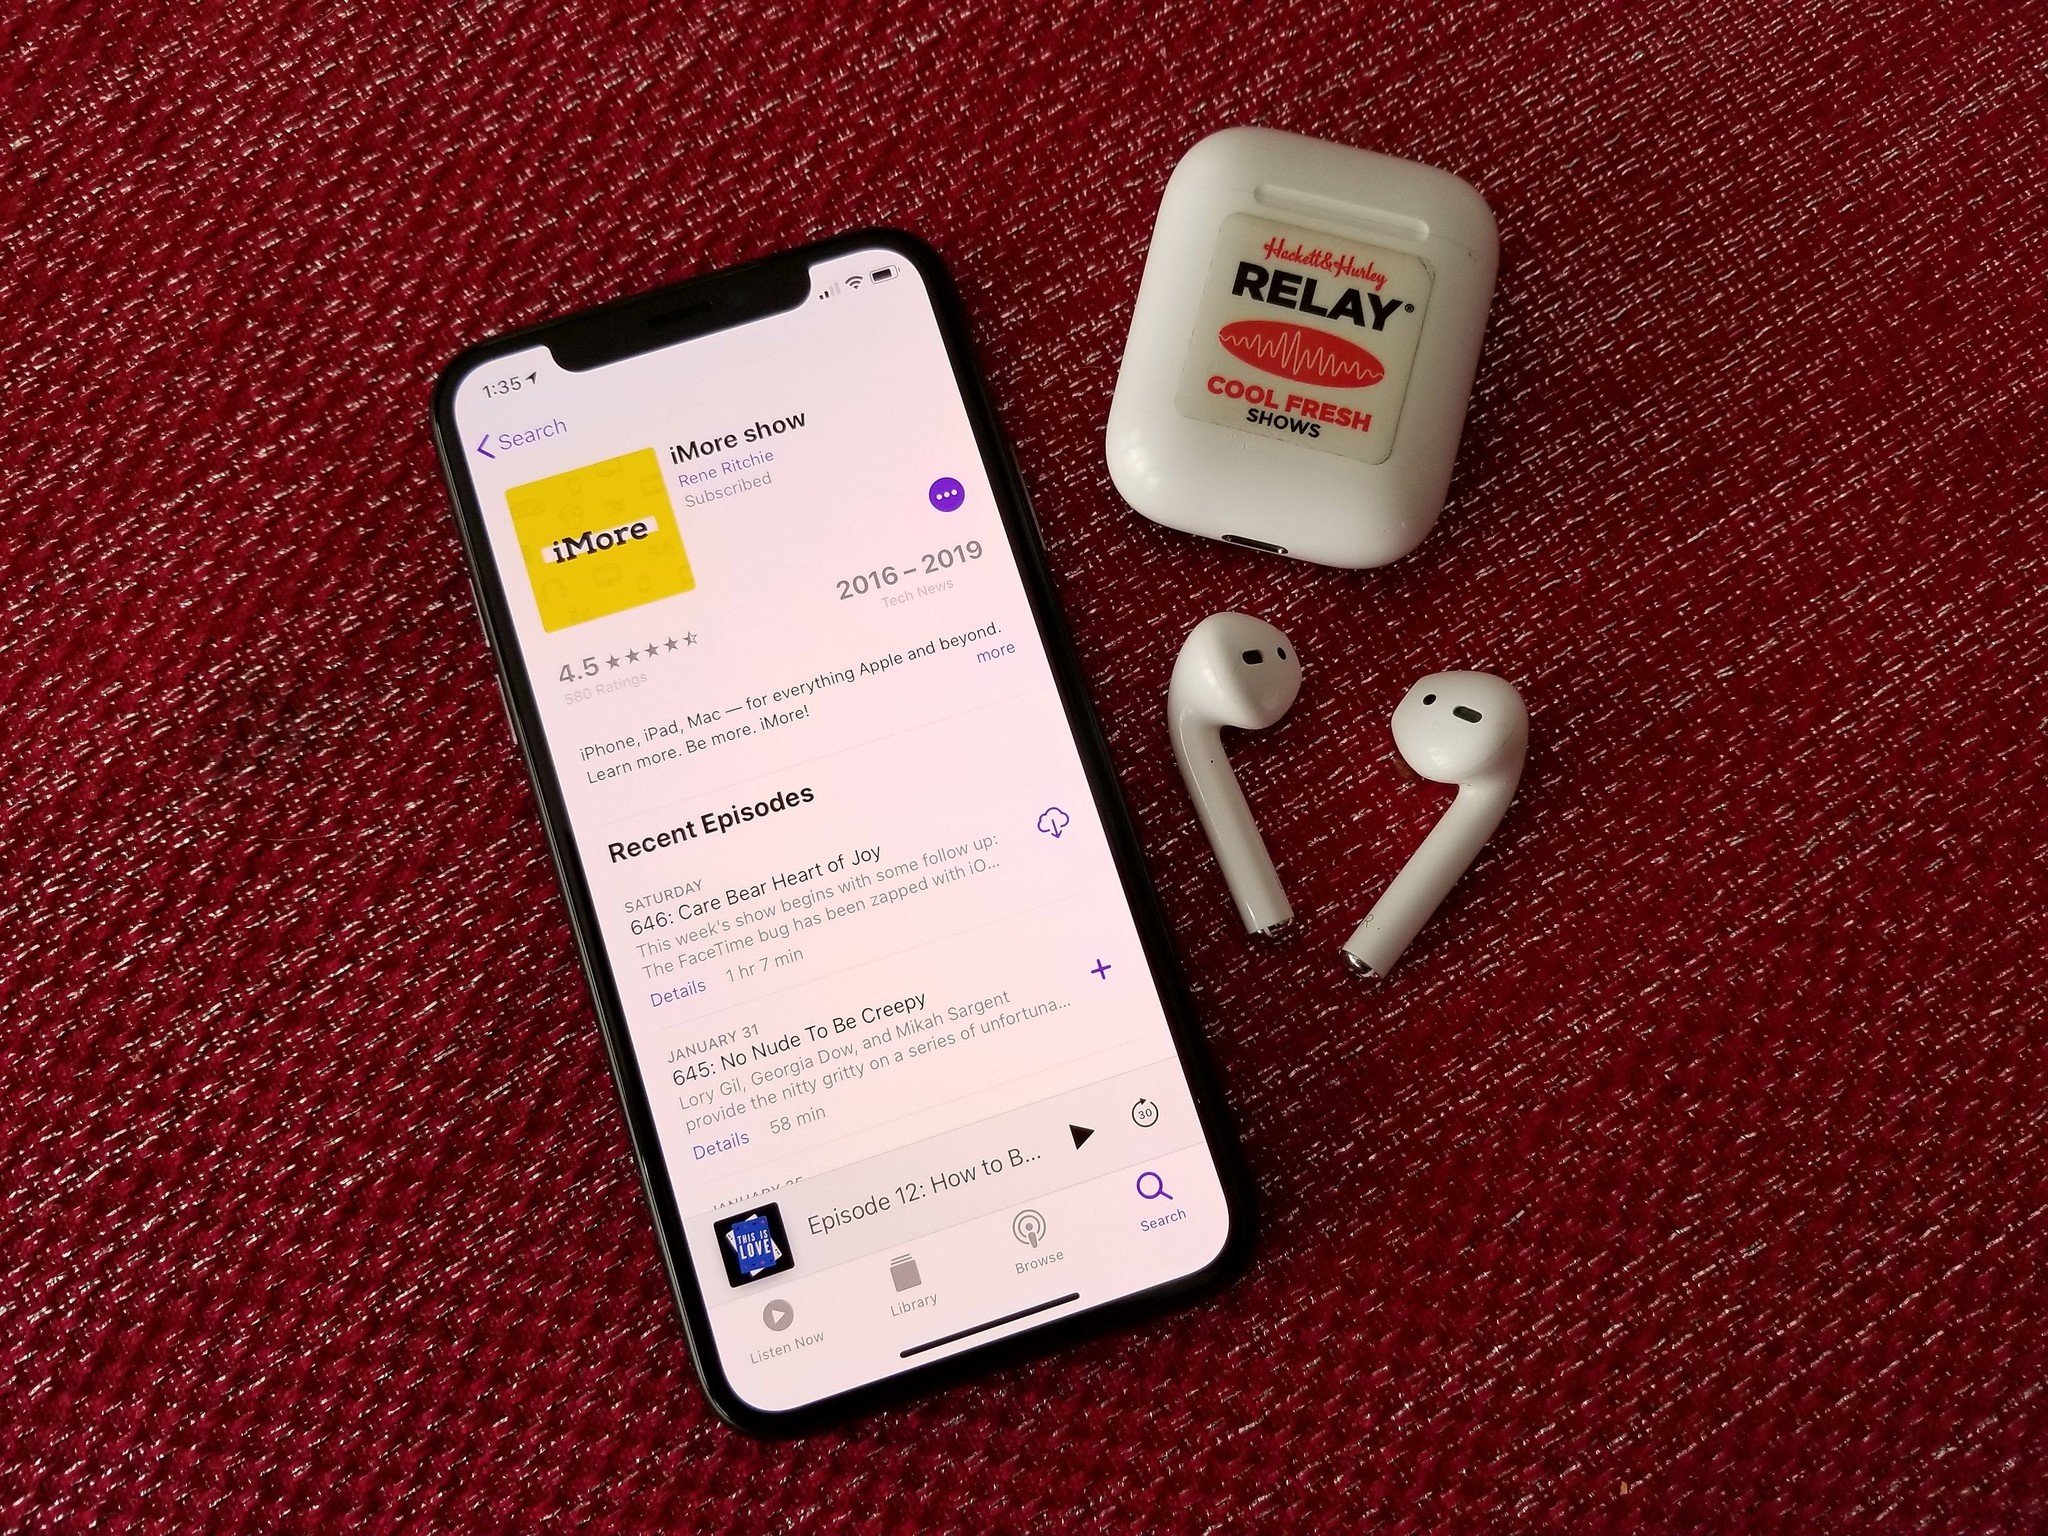 Apple Podcasts app showing off iMore Show with AirPods on red tablecloth